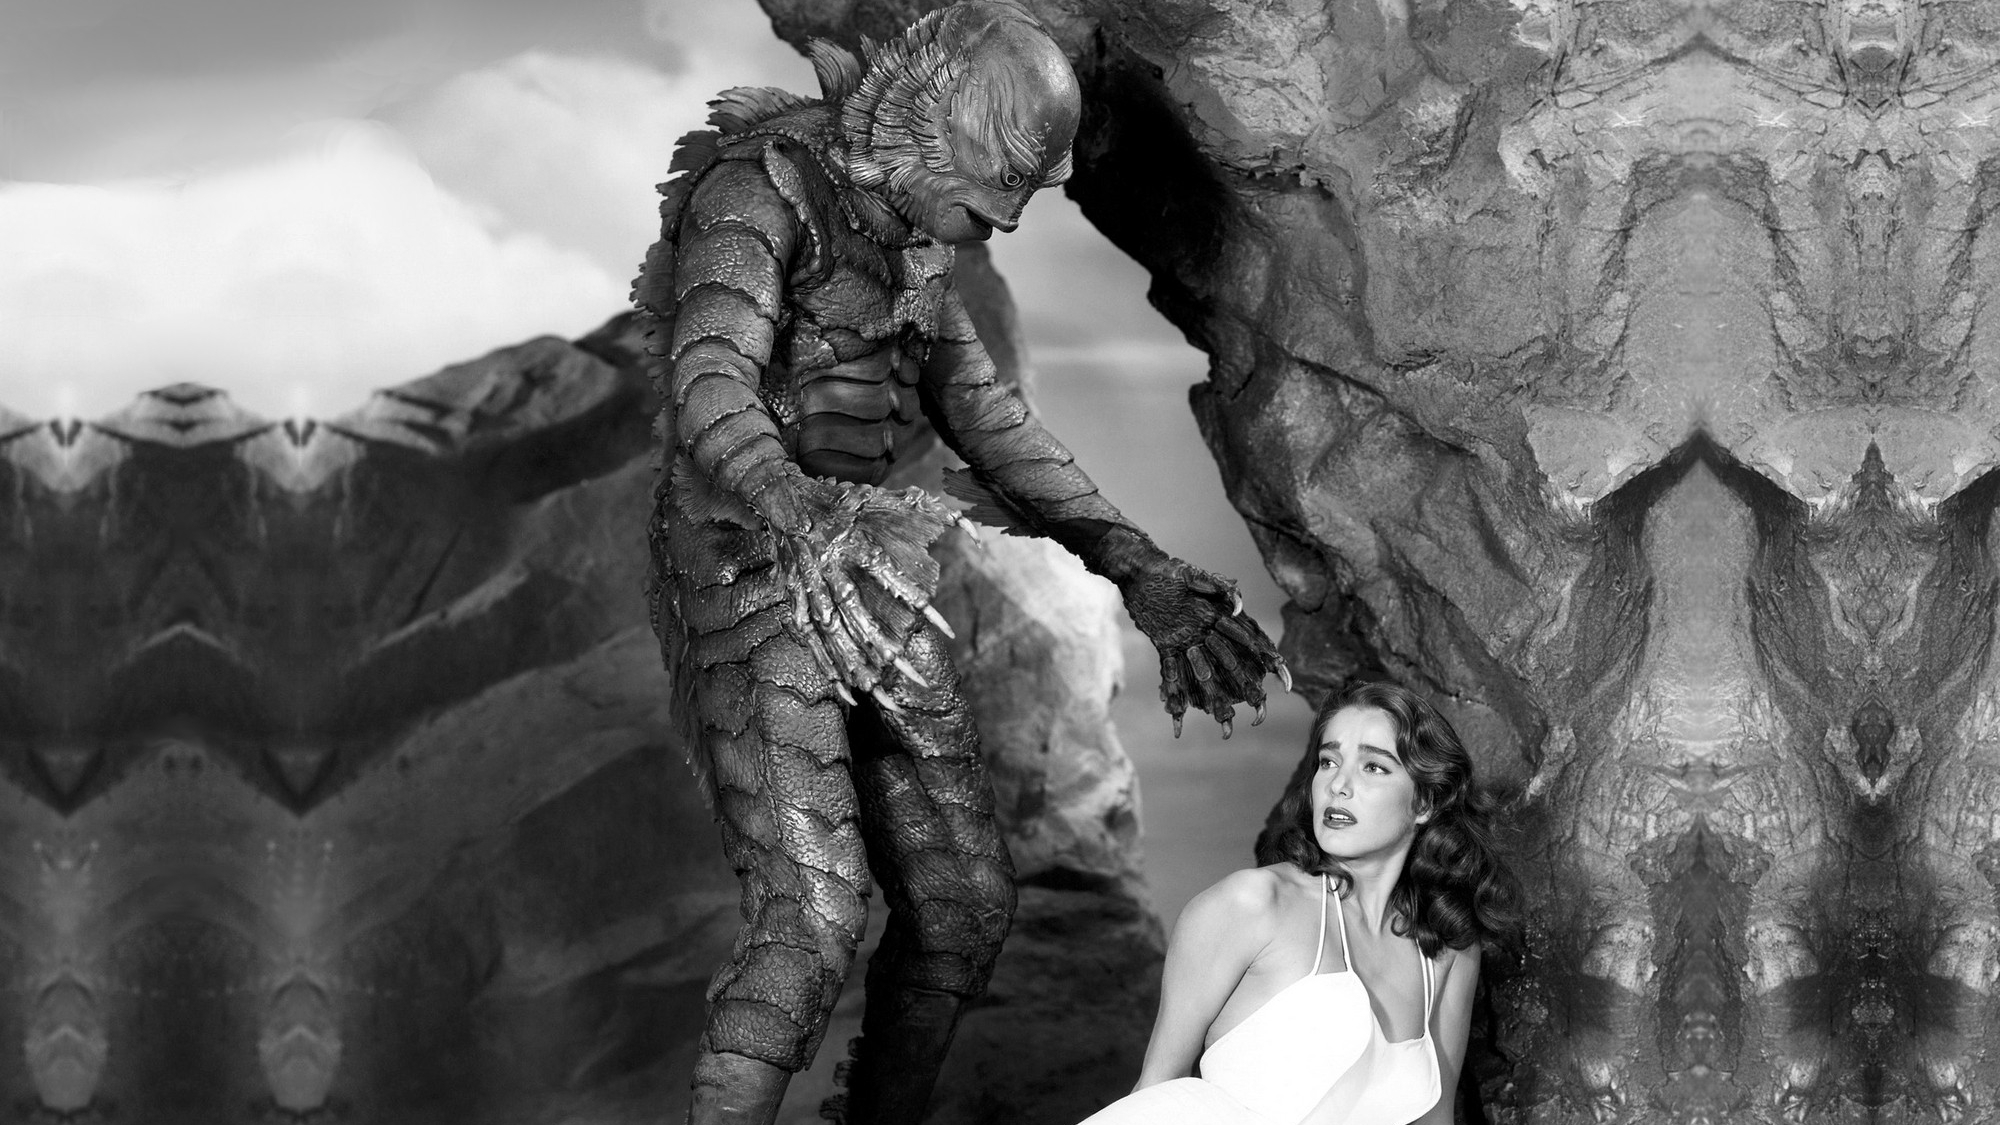 Movie Creature From The Black Lagoon HD Wallpaper | Background Image